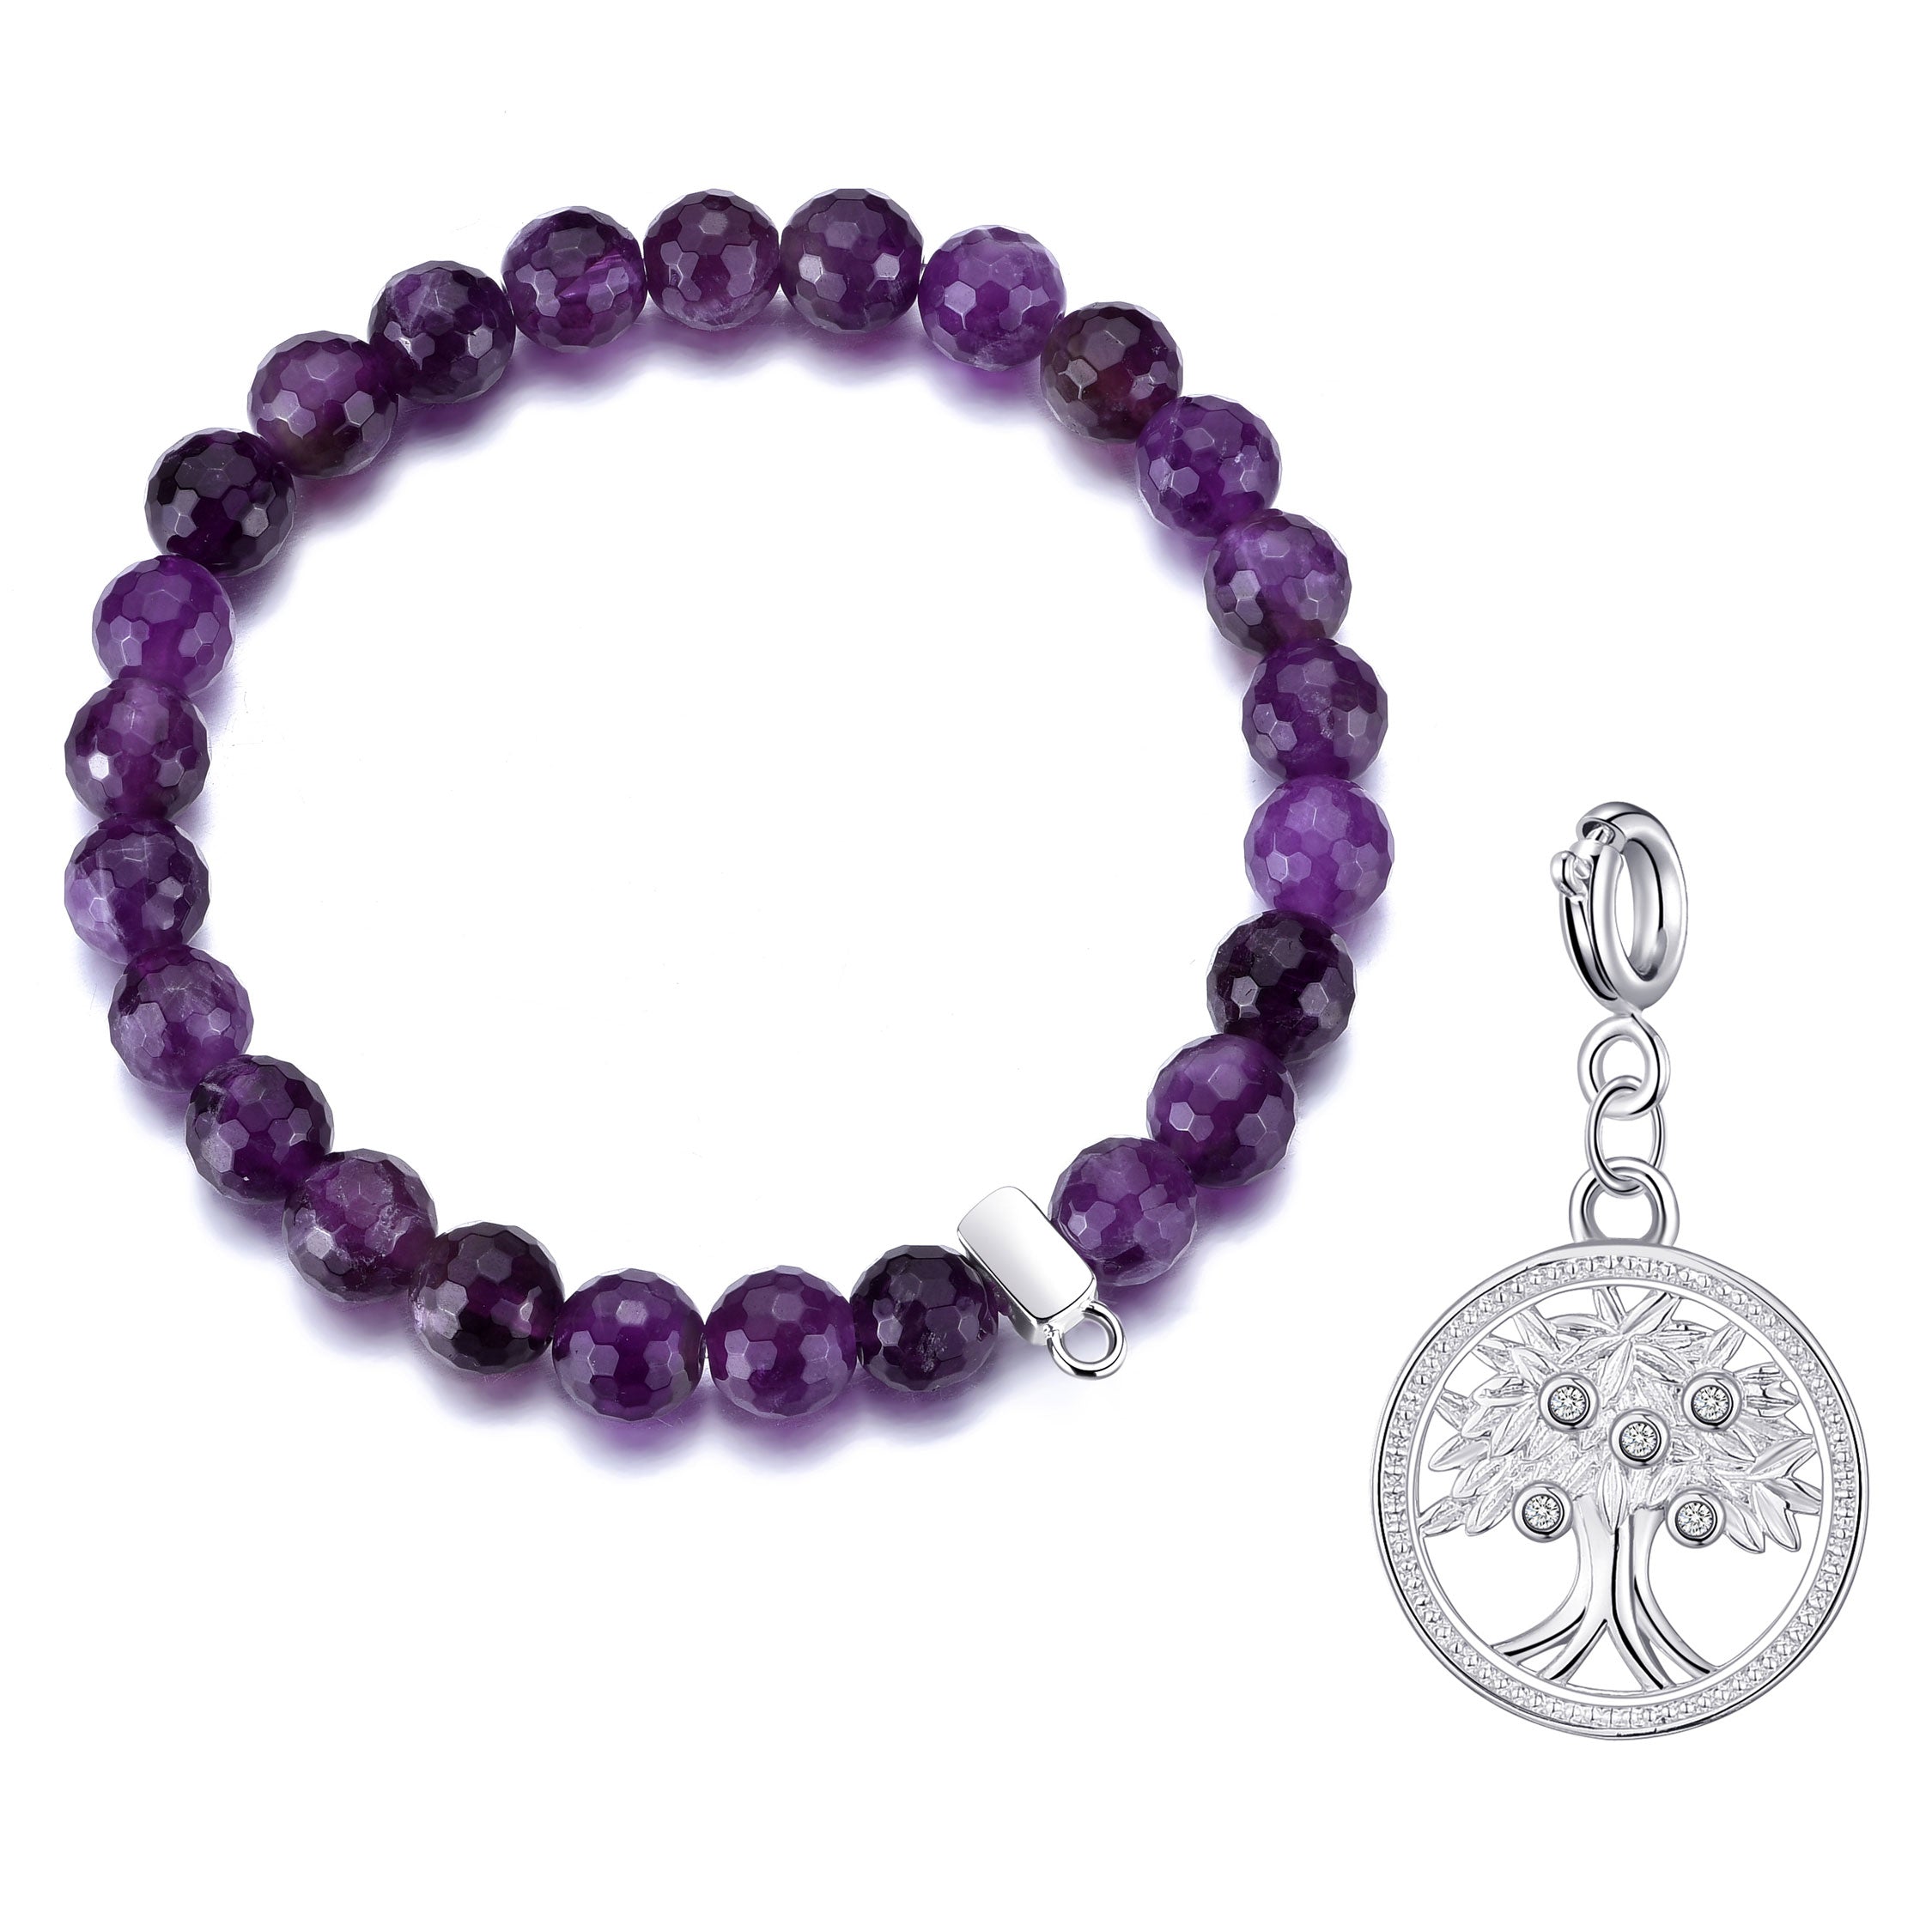 Faceted Amethyst Gemstone Stretch Bracelet with Charm Created with Zircondia® Crystals